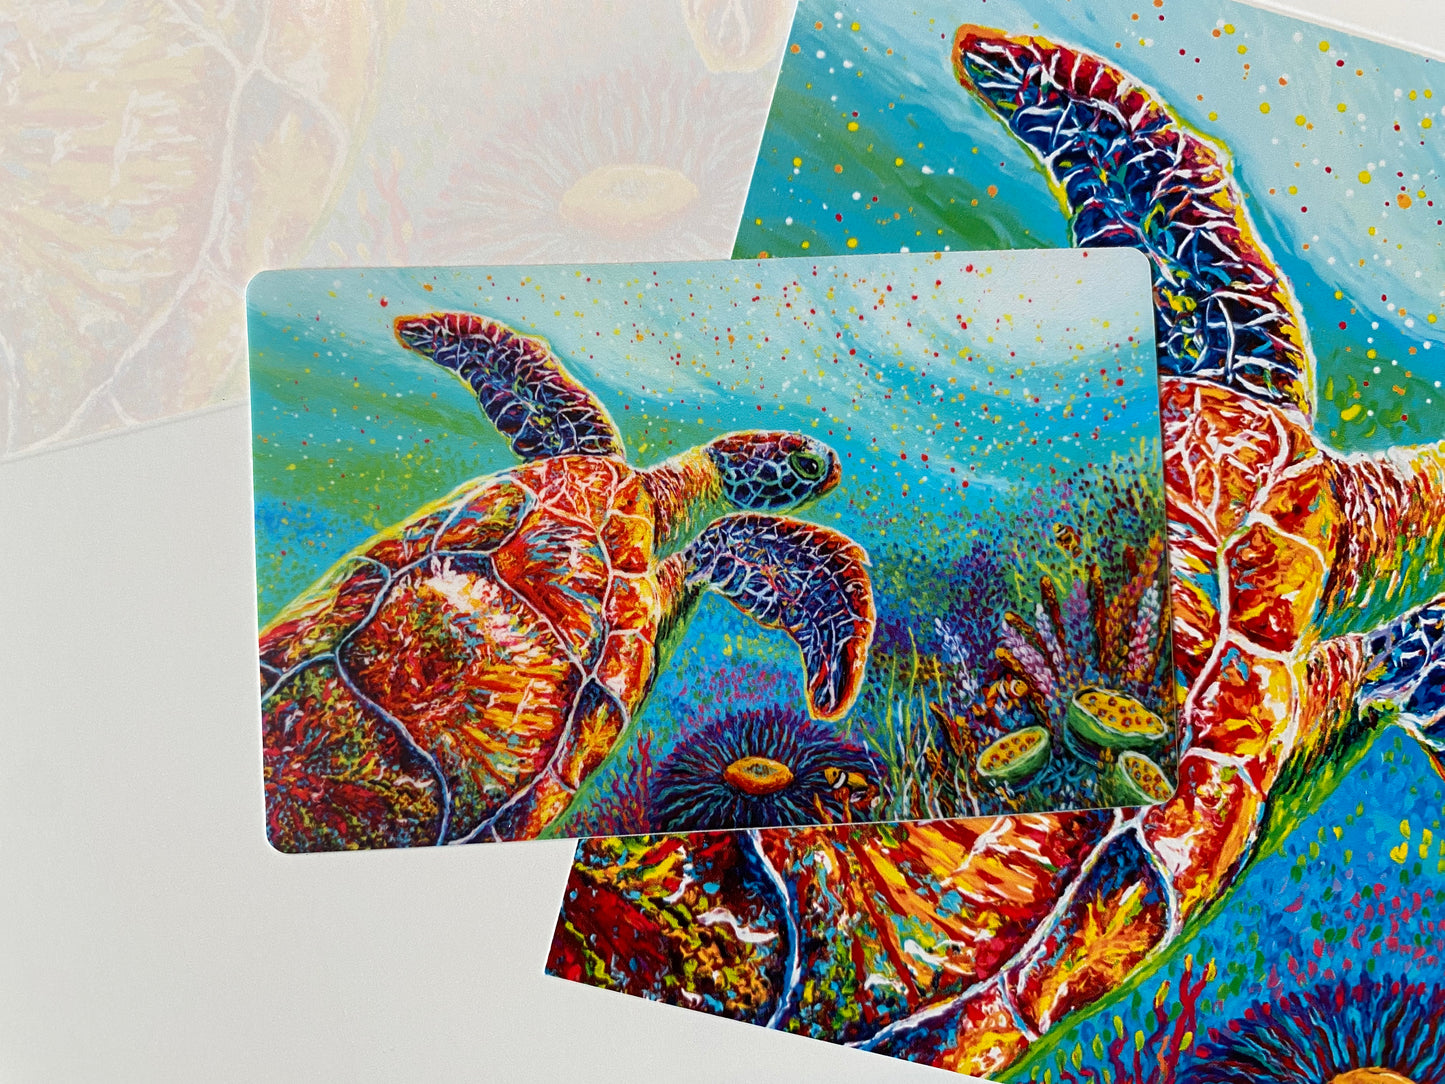 "Be Still" Green Sea Turtle Greeting Card for all occasion - Fine Art Greeting Card